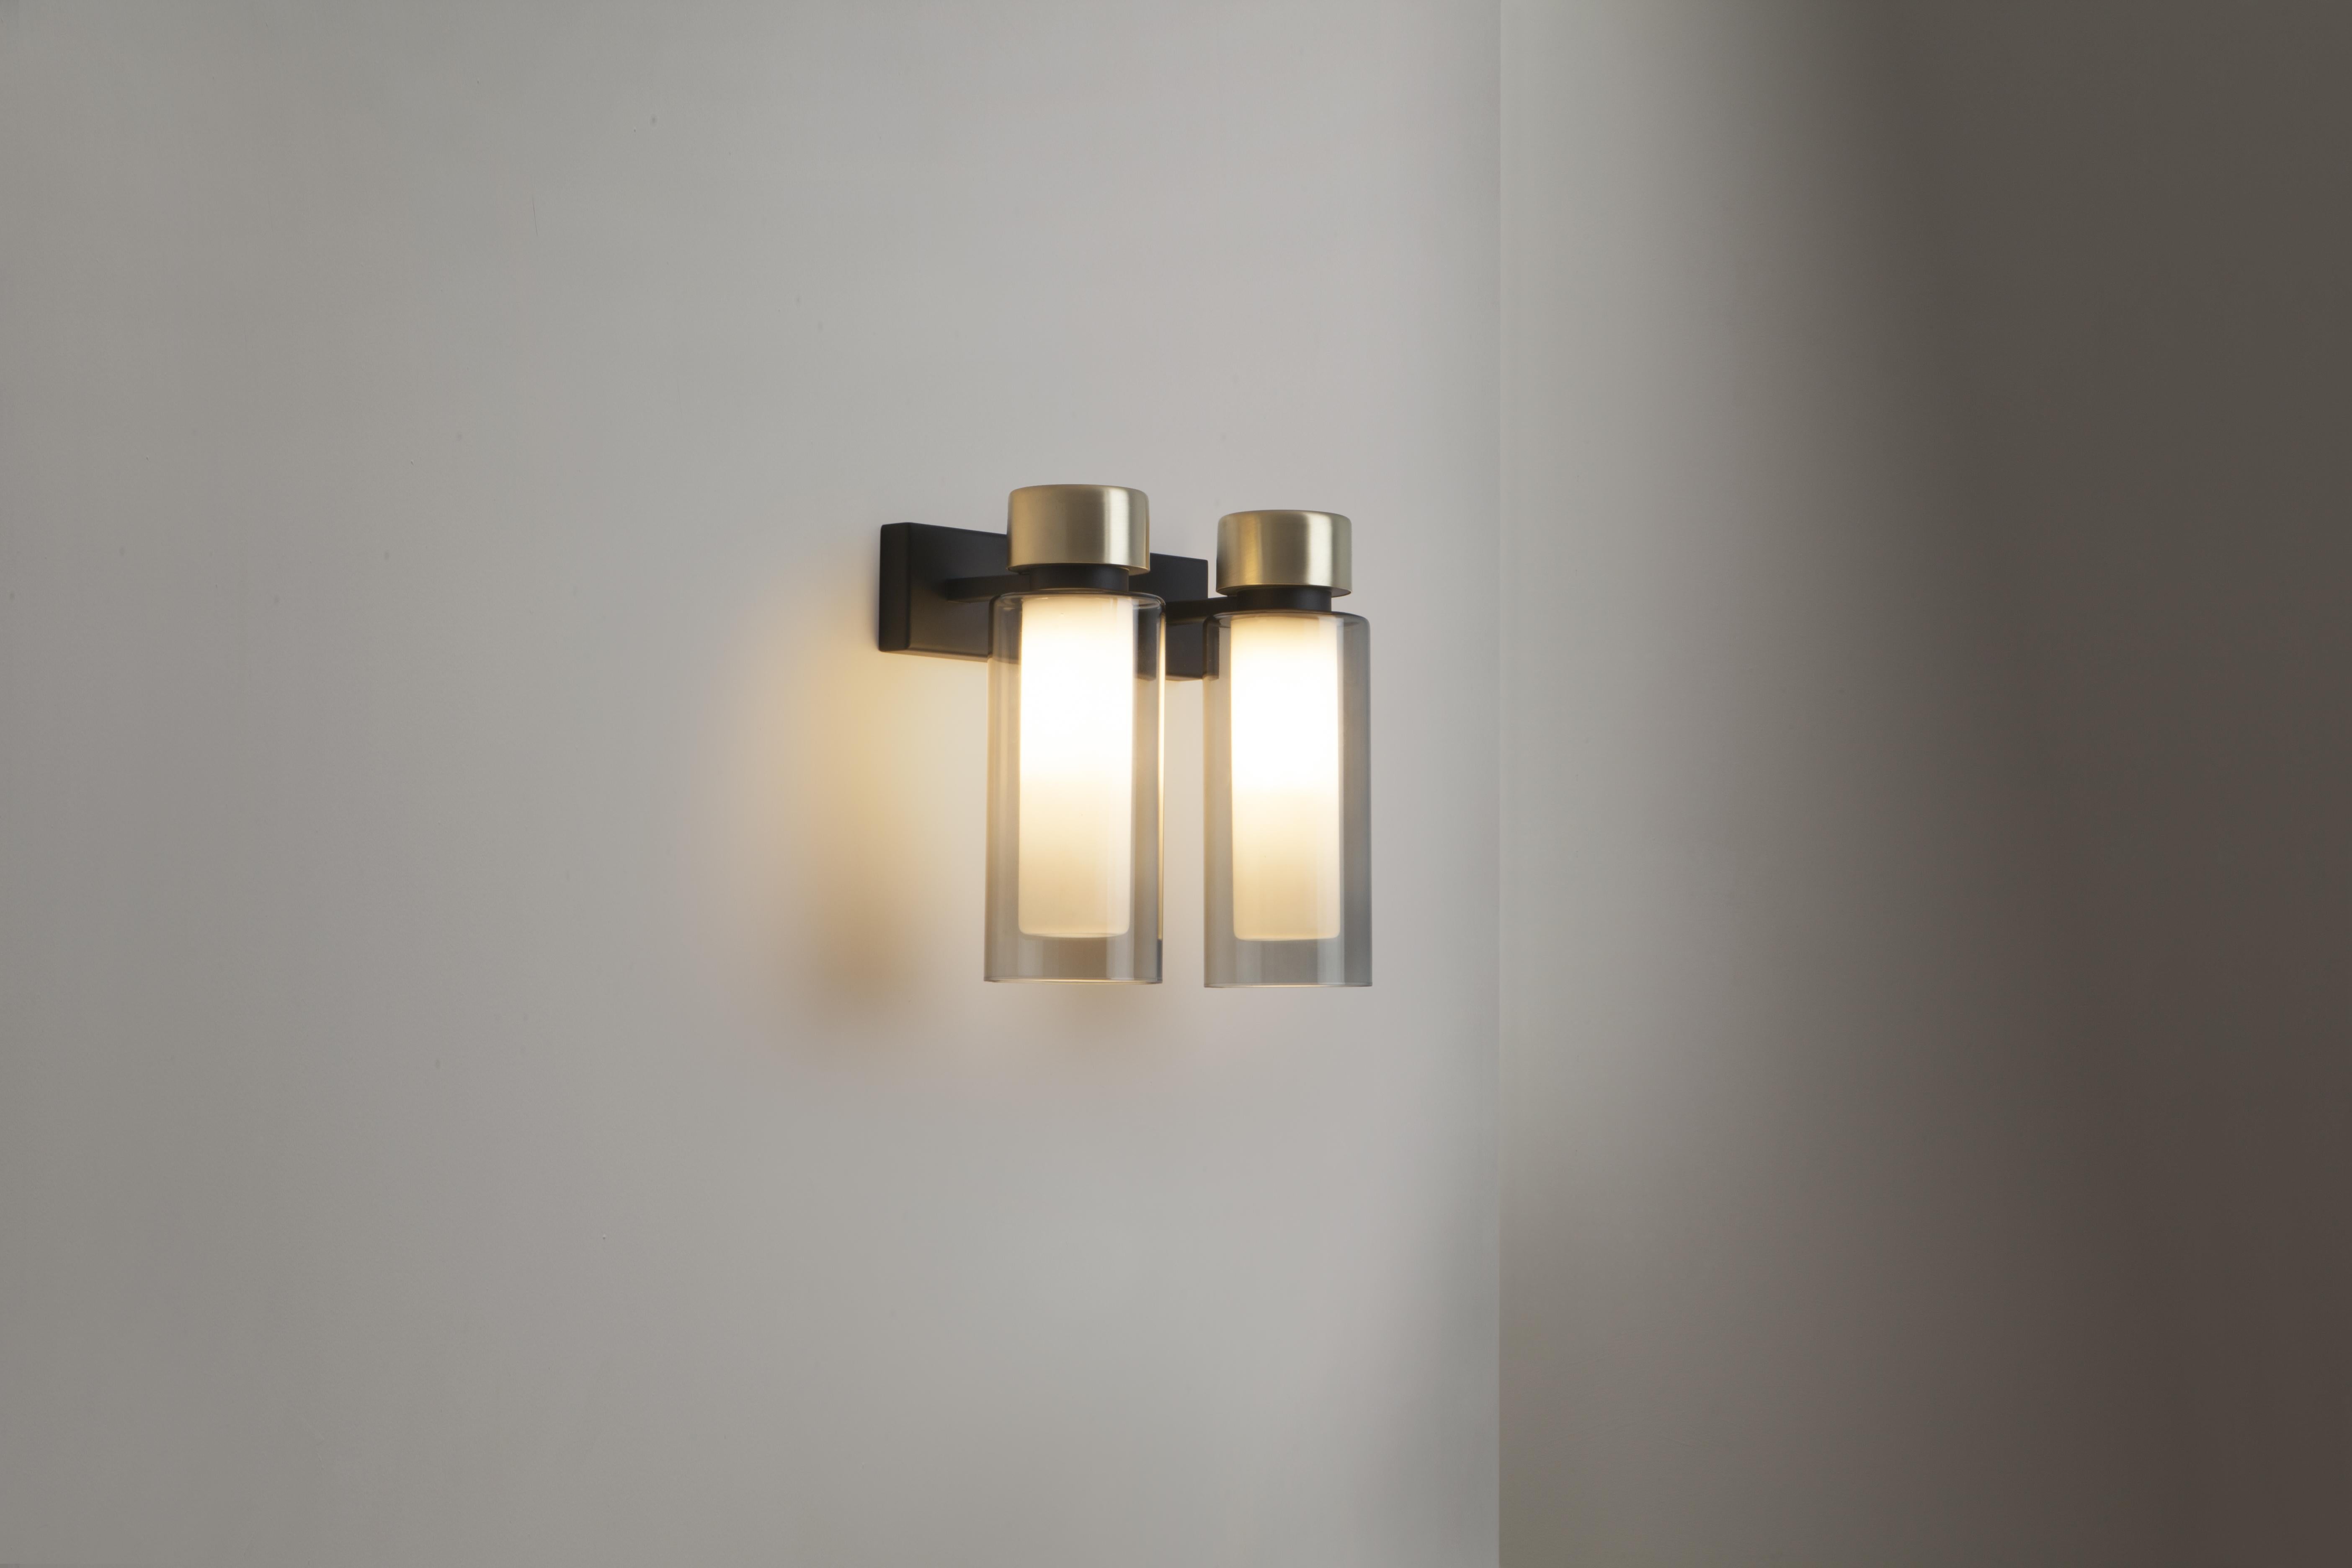 Osman / 560.42
Family of lamps with a rational design enriched by precious metallic details and double-wall cylindrical diffusers that give a fascinating
and harmonious light diffusion. The particular orthogonal structure and the well-balanced